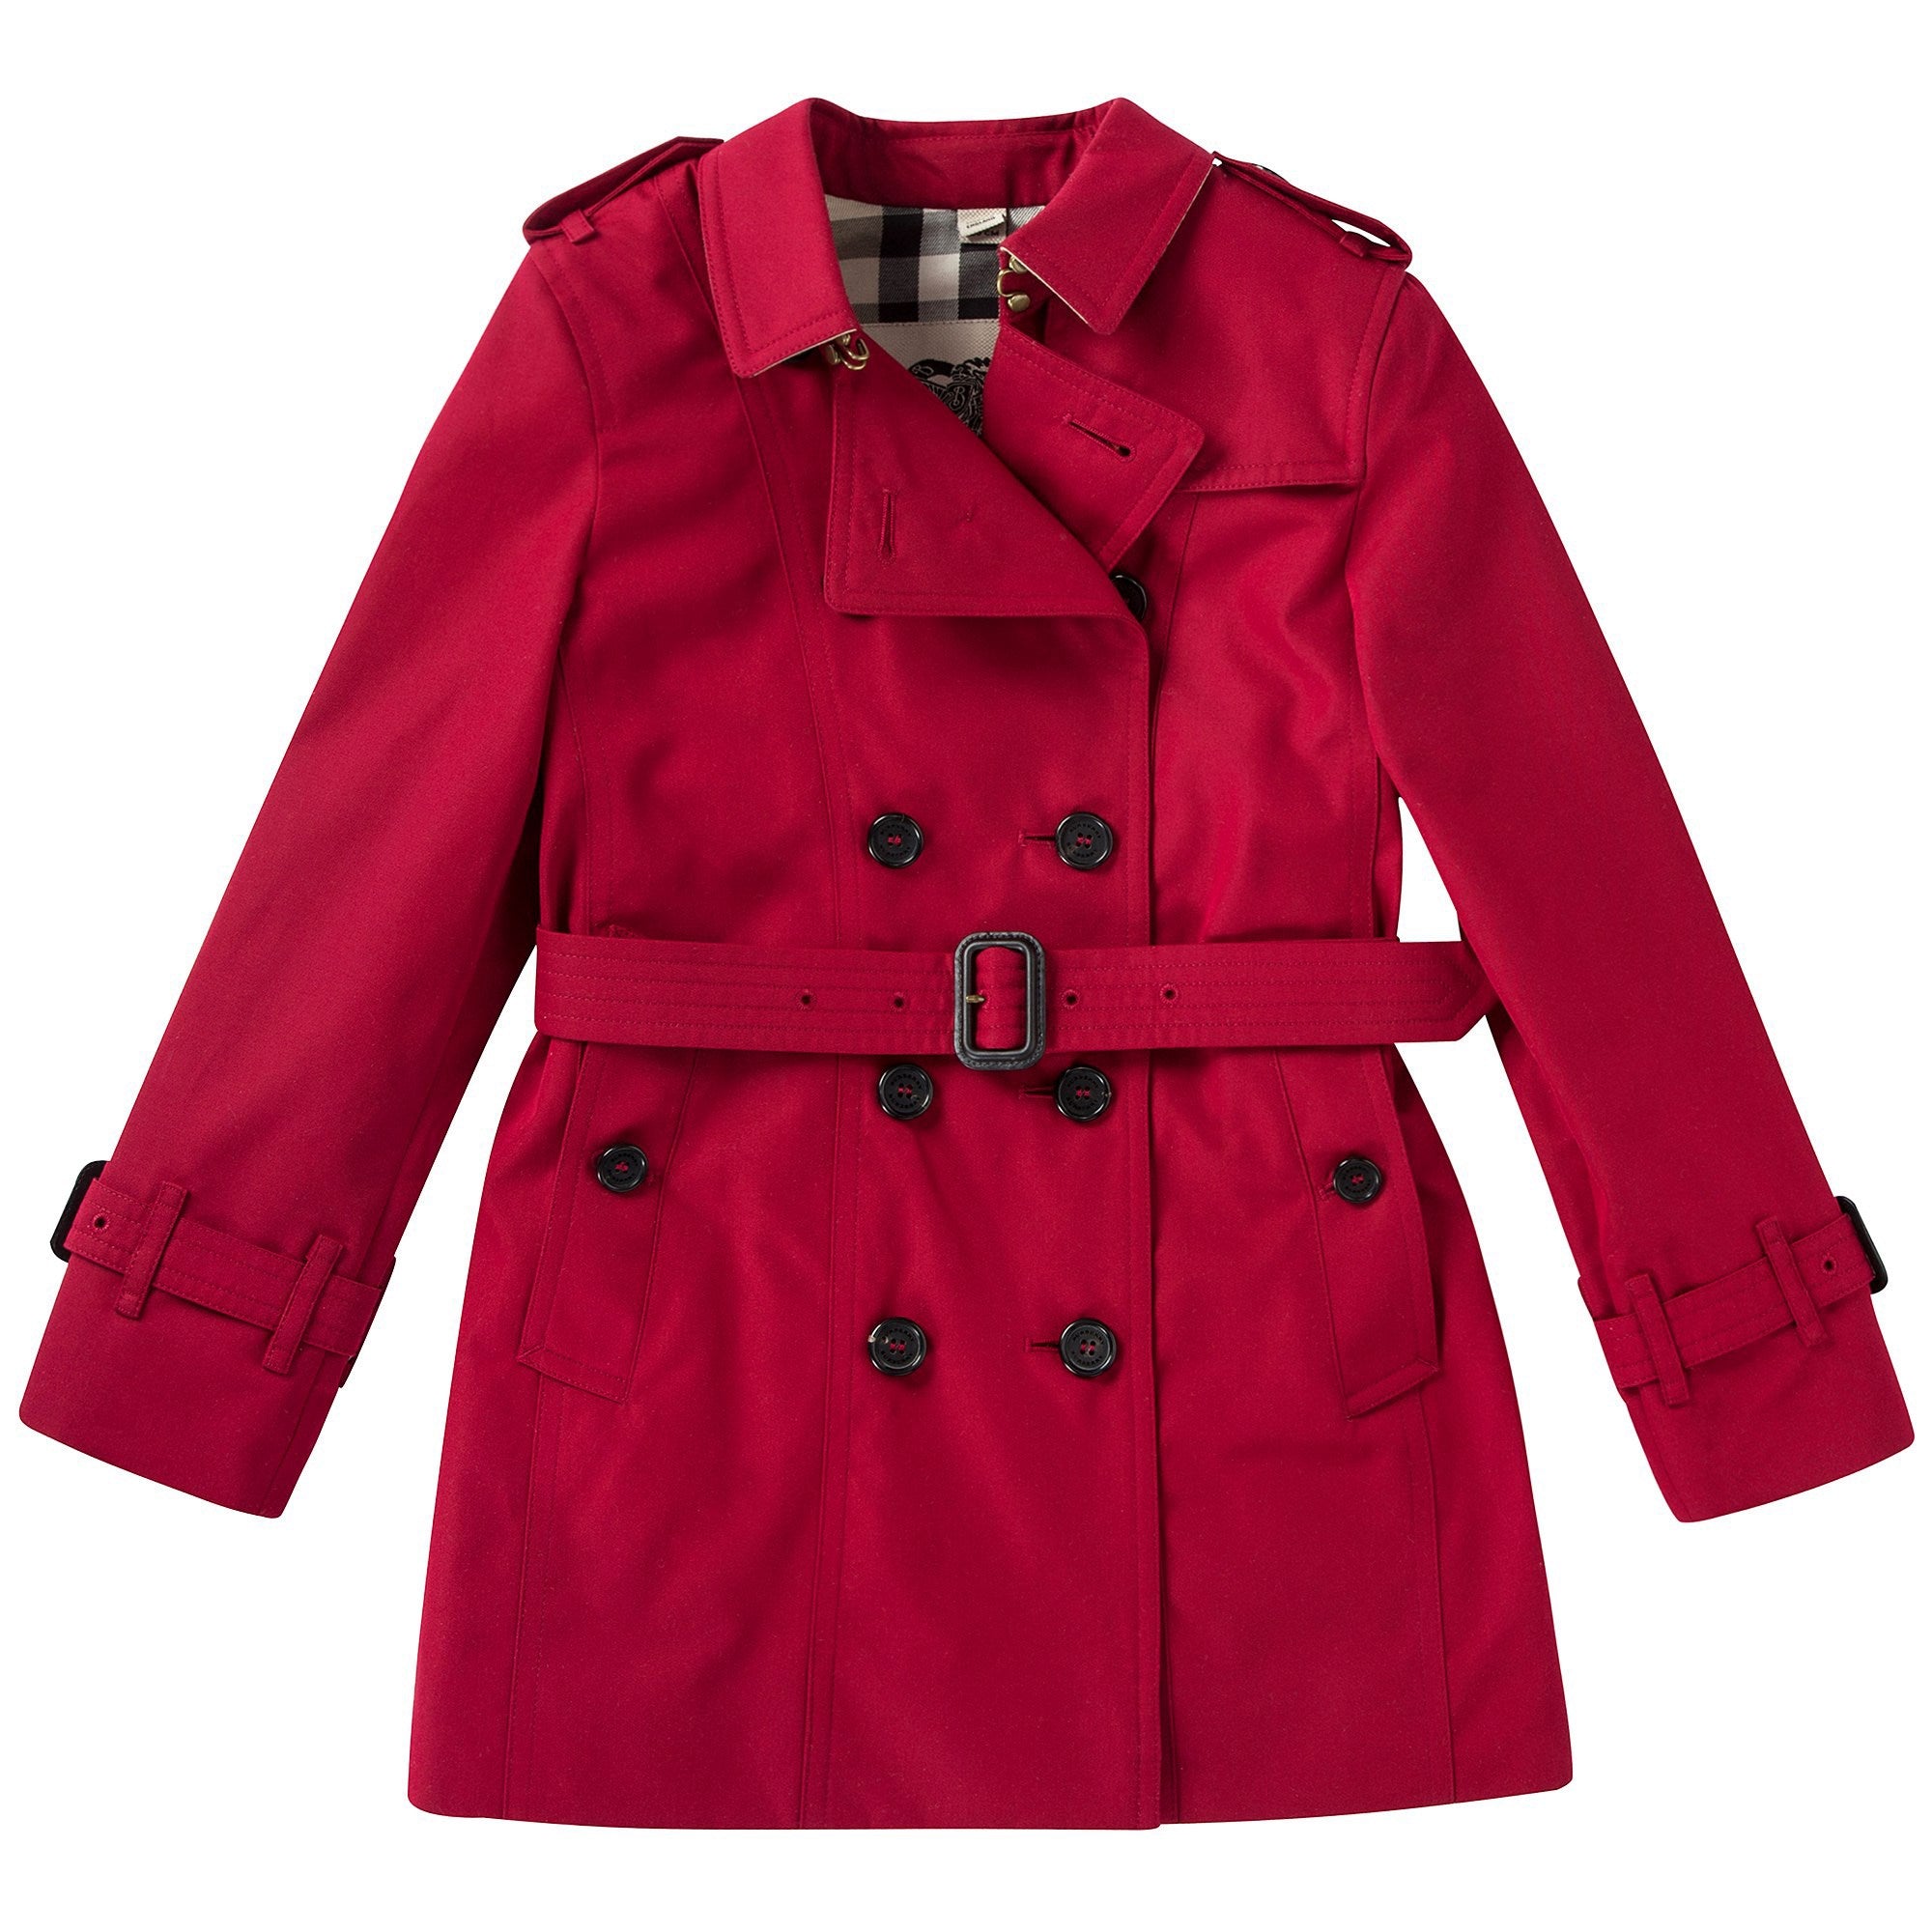 Girls Parade Red Cotton Coats